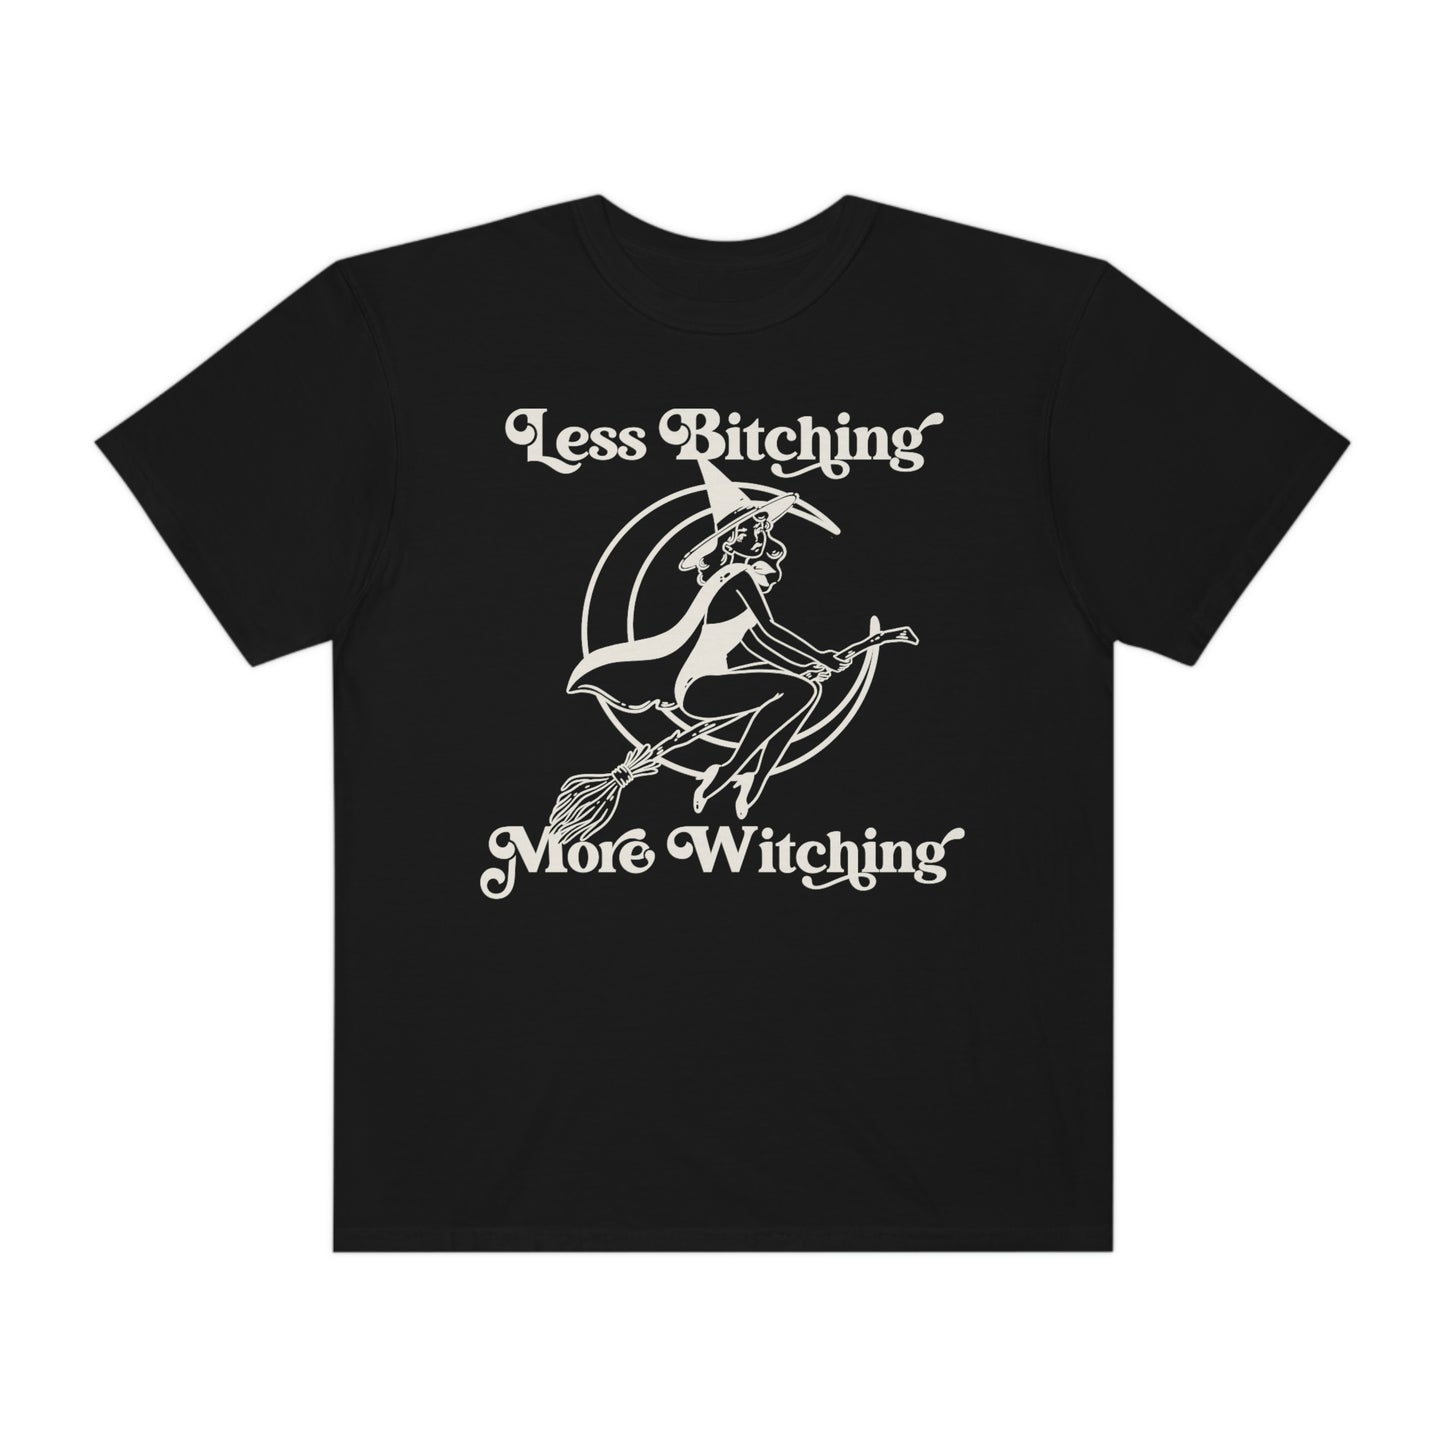 More Witching Comfort Colors Unisex T-shirt - Esdee